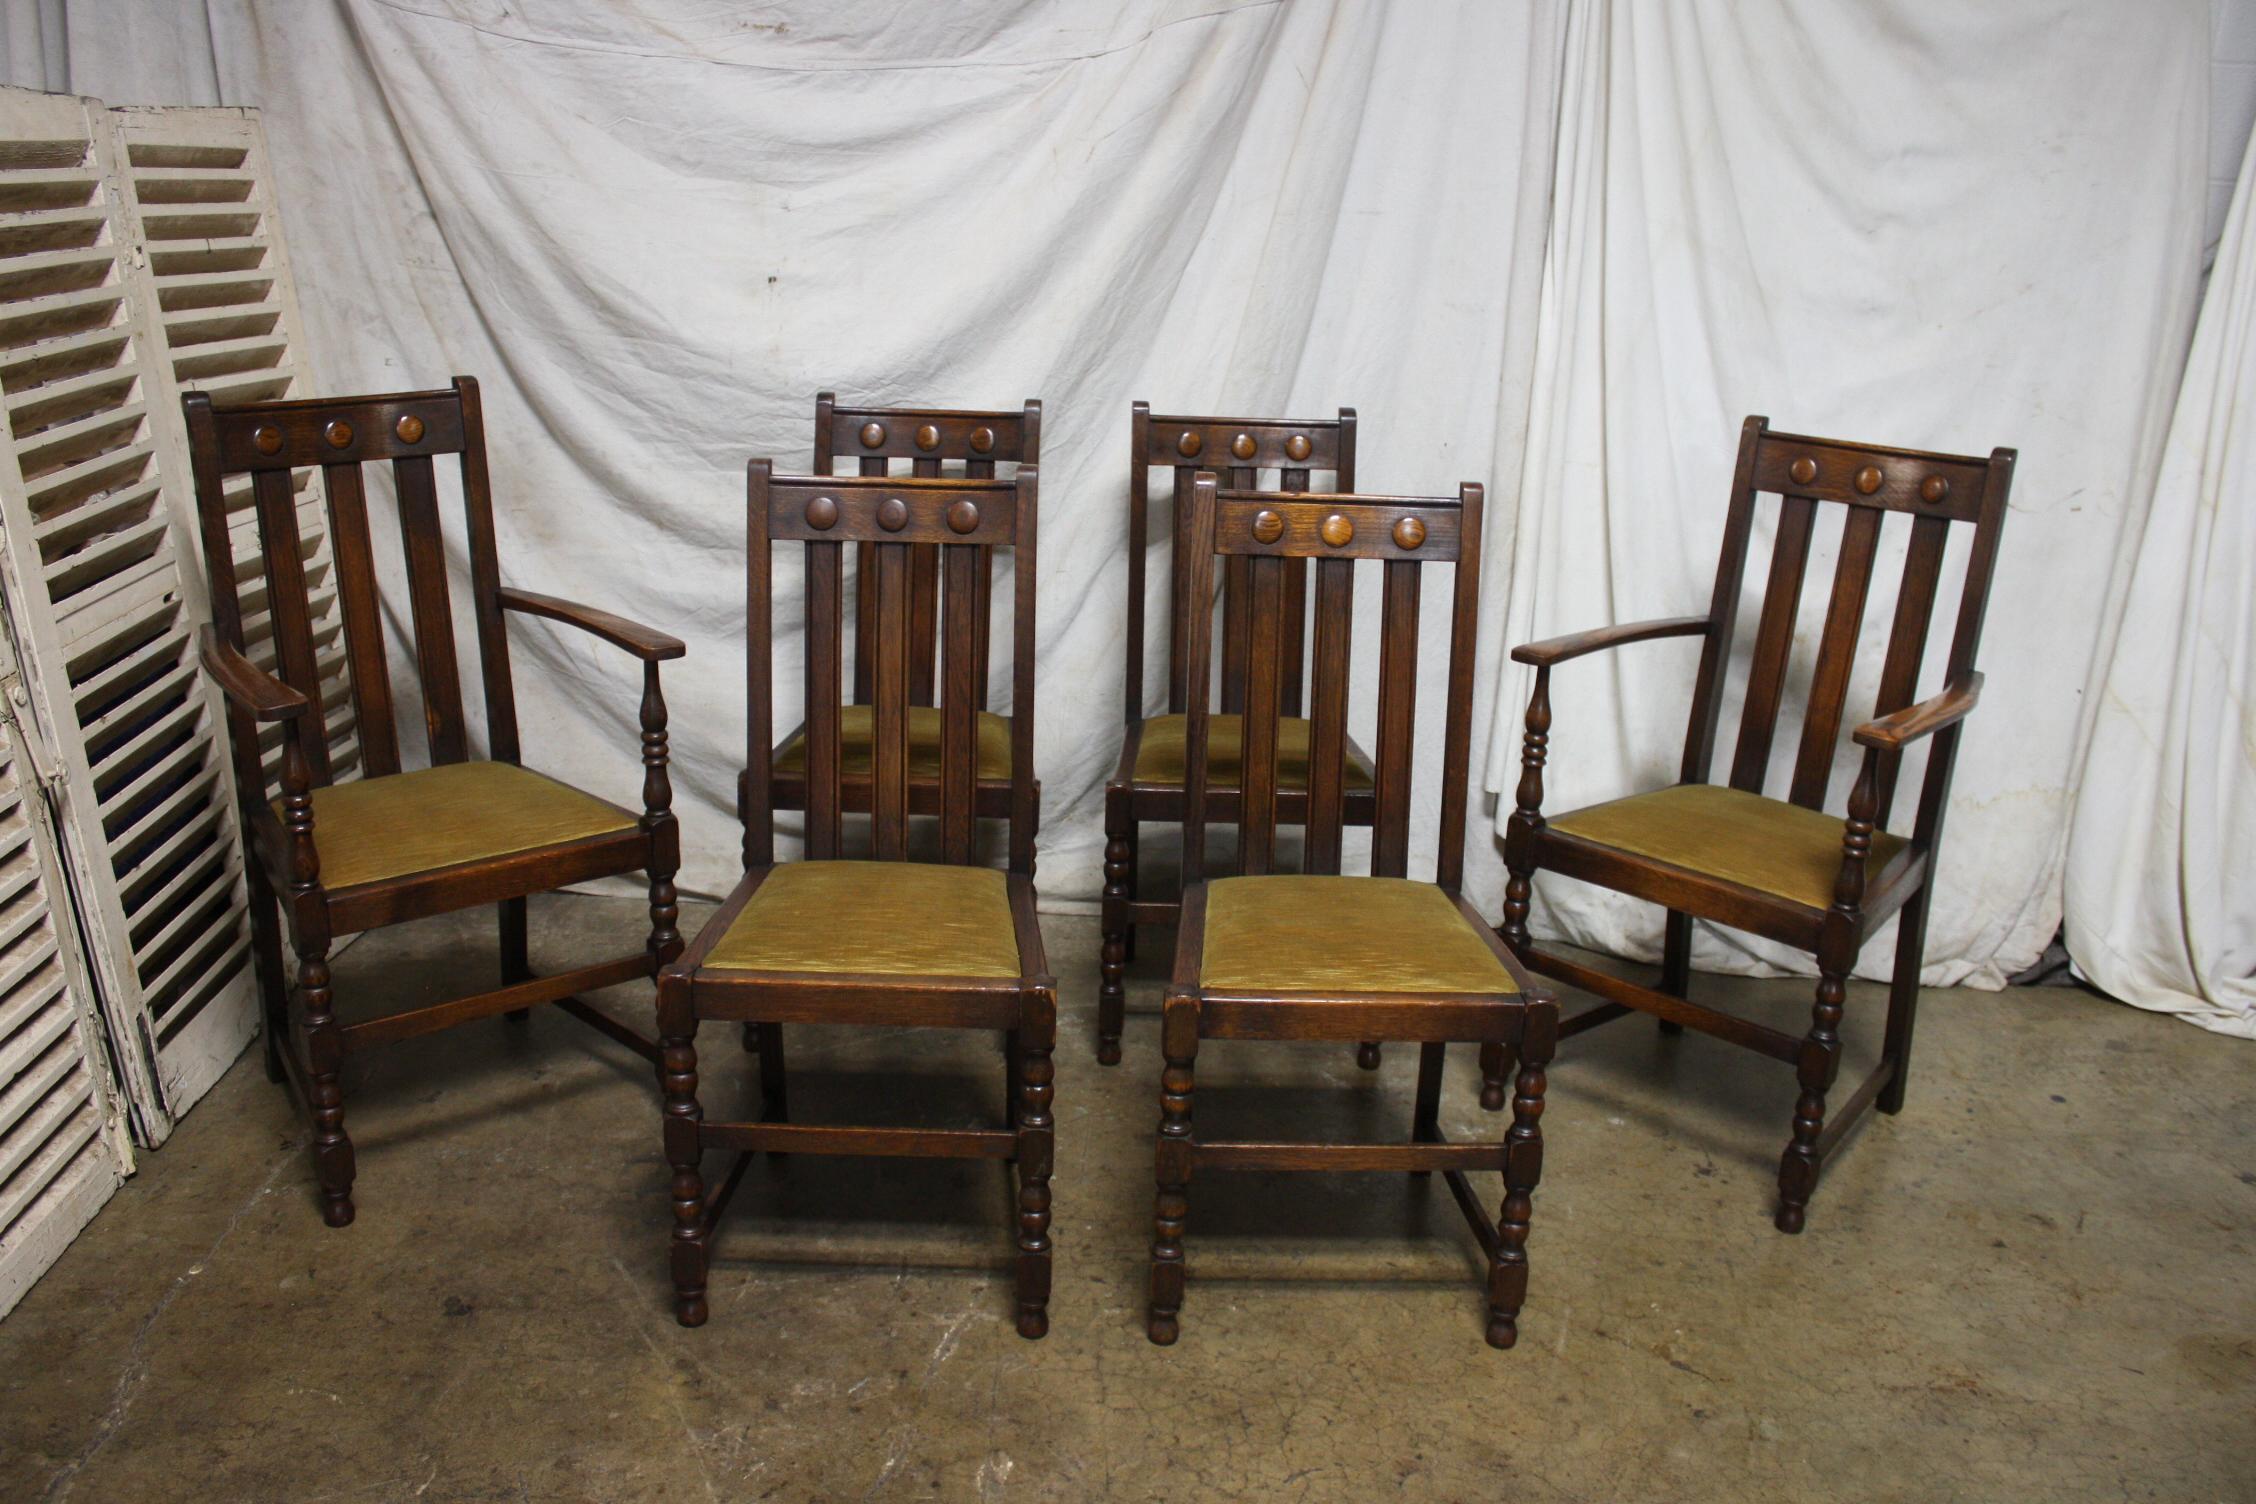 This is a set of 4 chairs and 2 arm chairs.
Dimensions of the 4 chairs 17.75''W x 18.75''D x 38.75''H (floor to the seat 18''H). 
Dimensions of the 2 armchairs 22.75''W x 20.75''D x 41''H (floor to the seat 18''H).